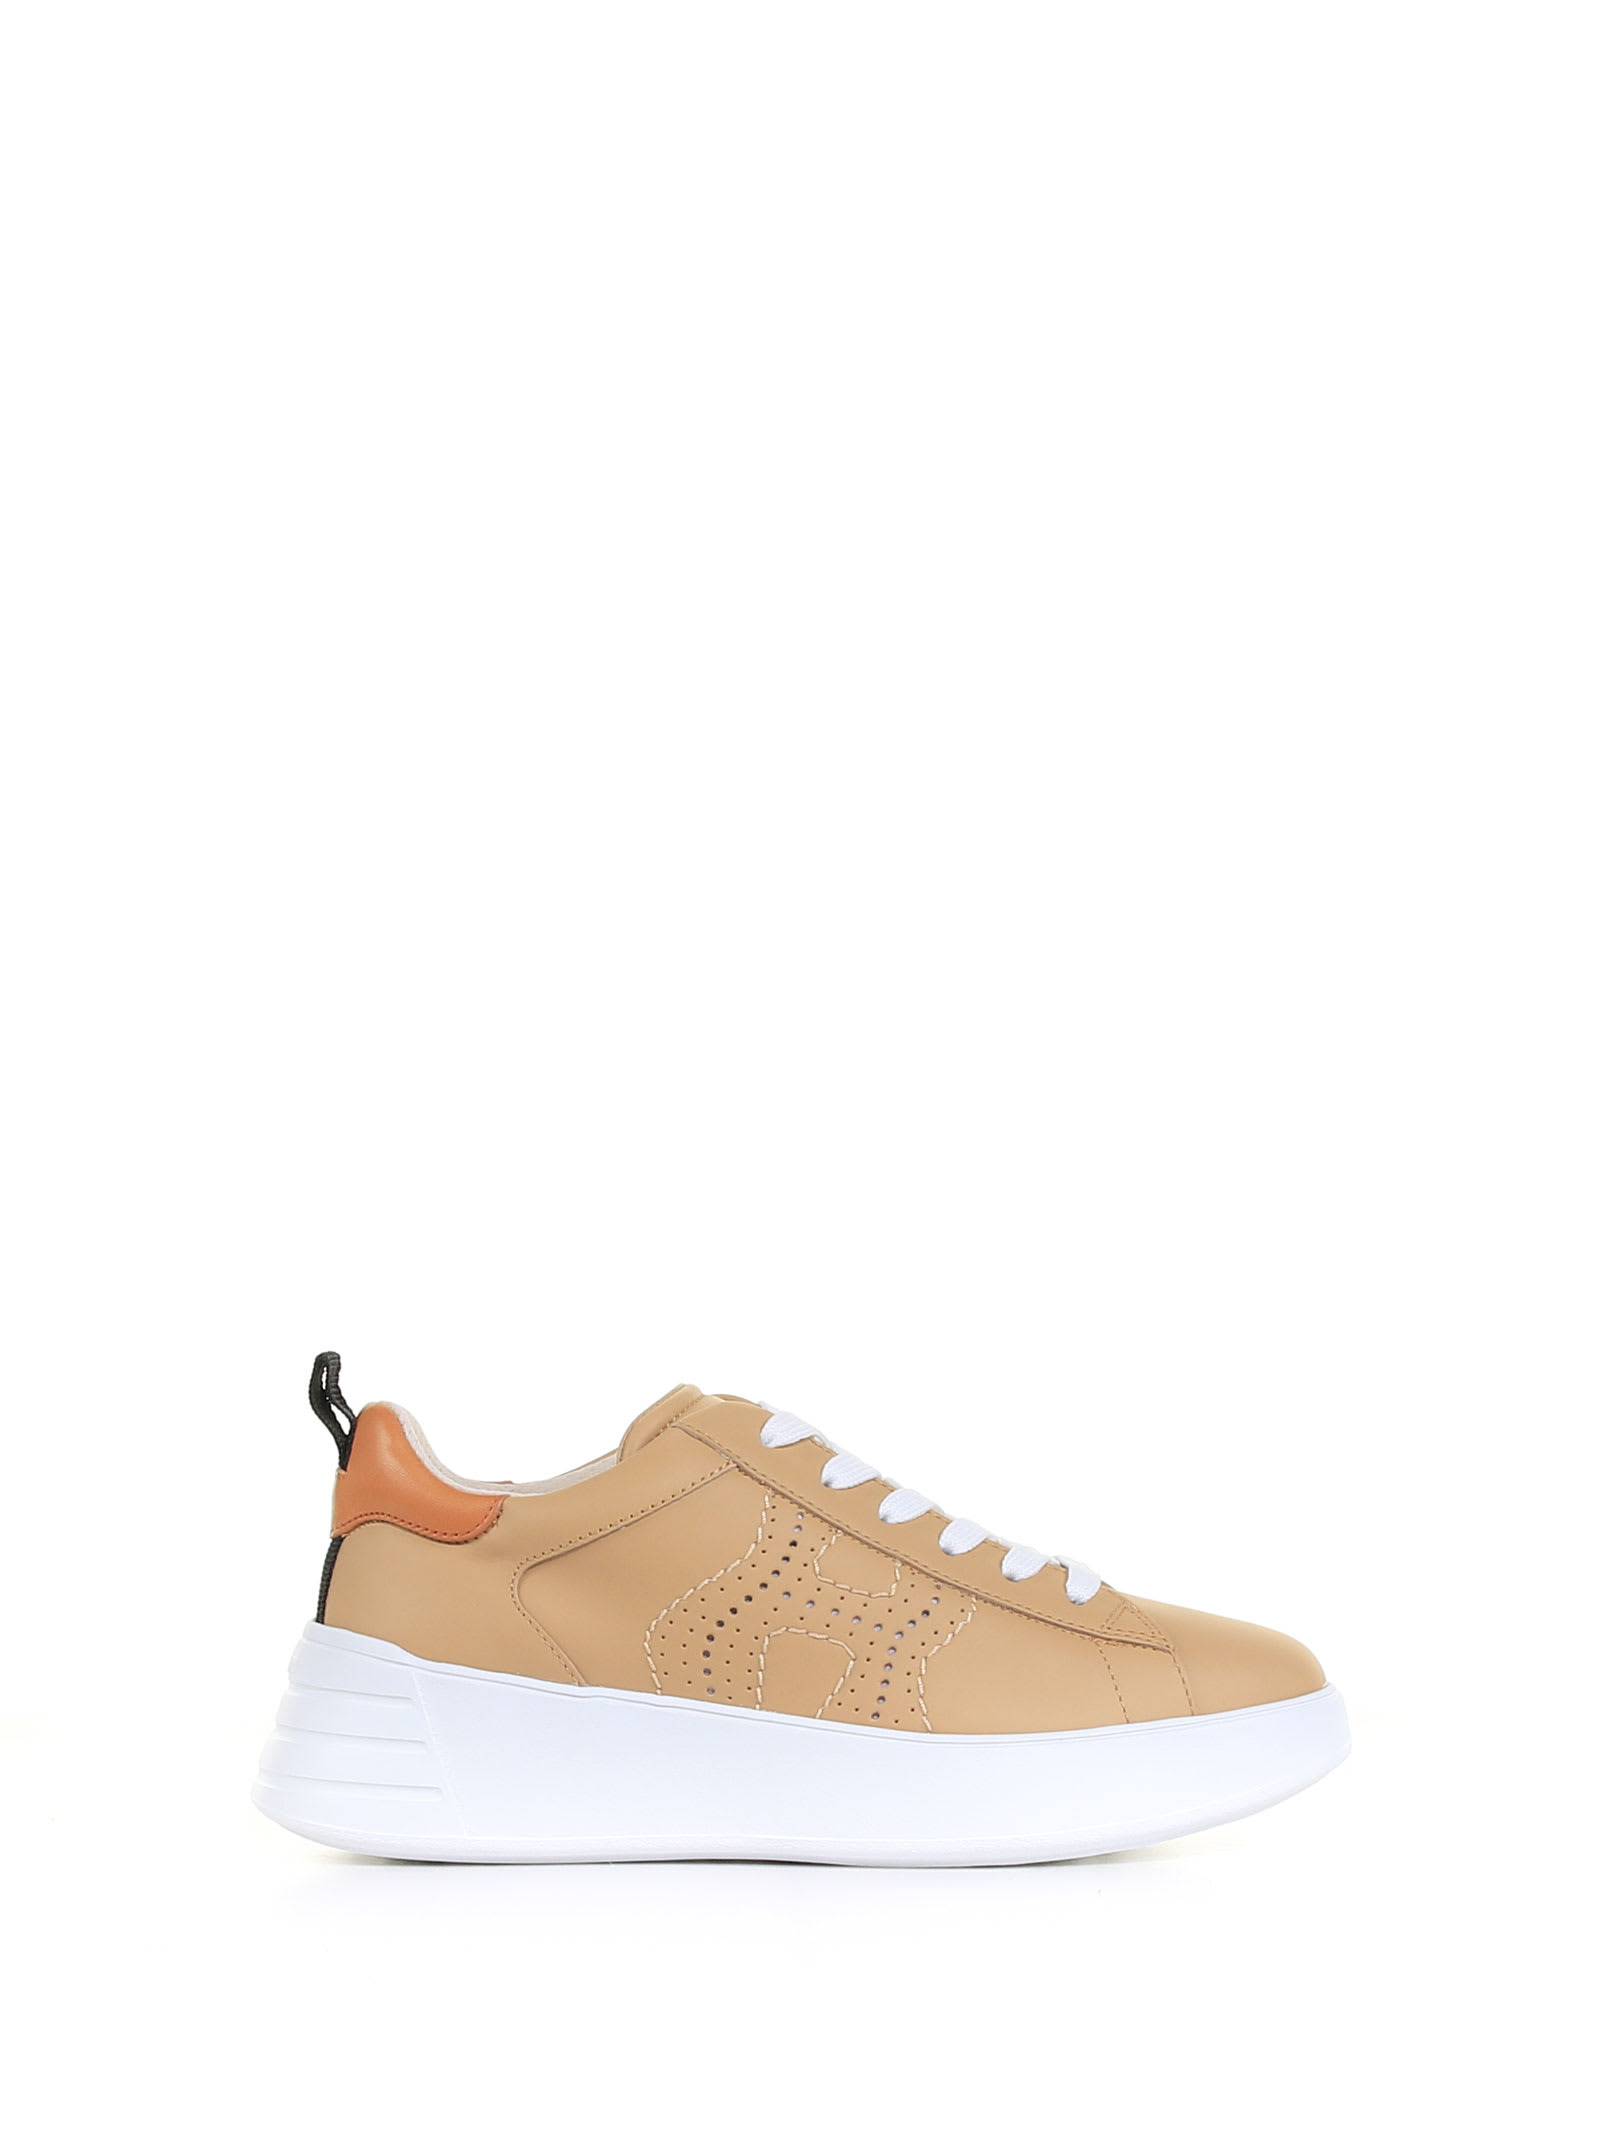 Hogan Rebel Sneaker With Embroidered Side H